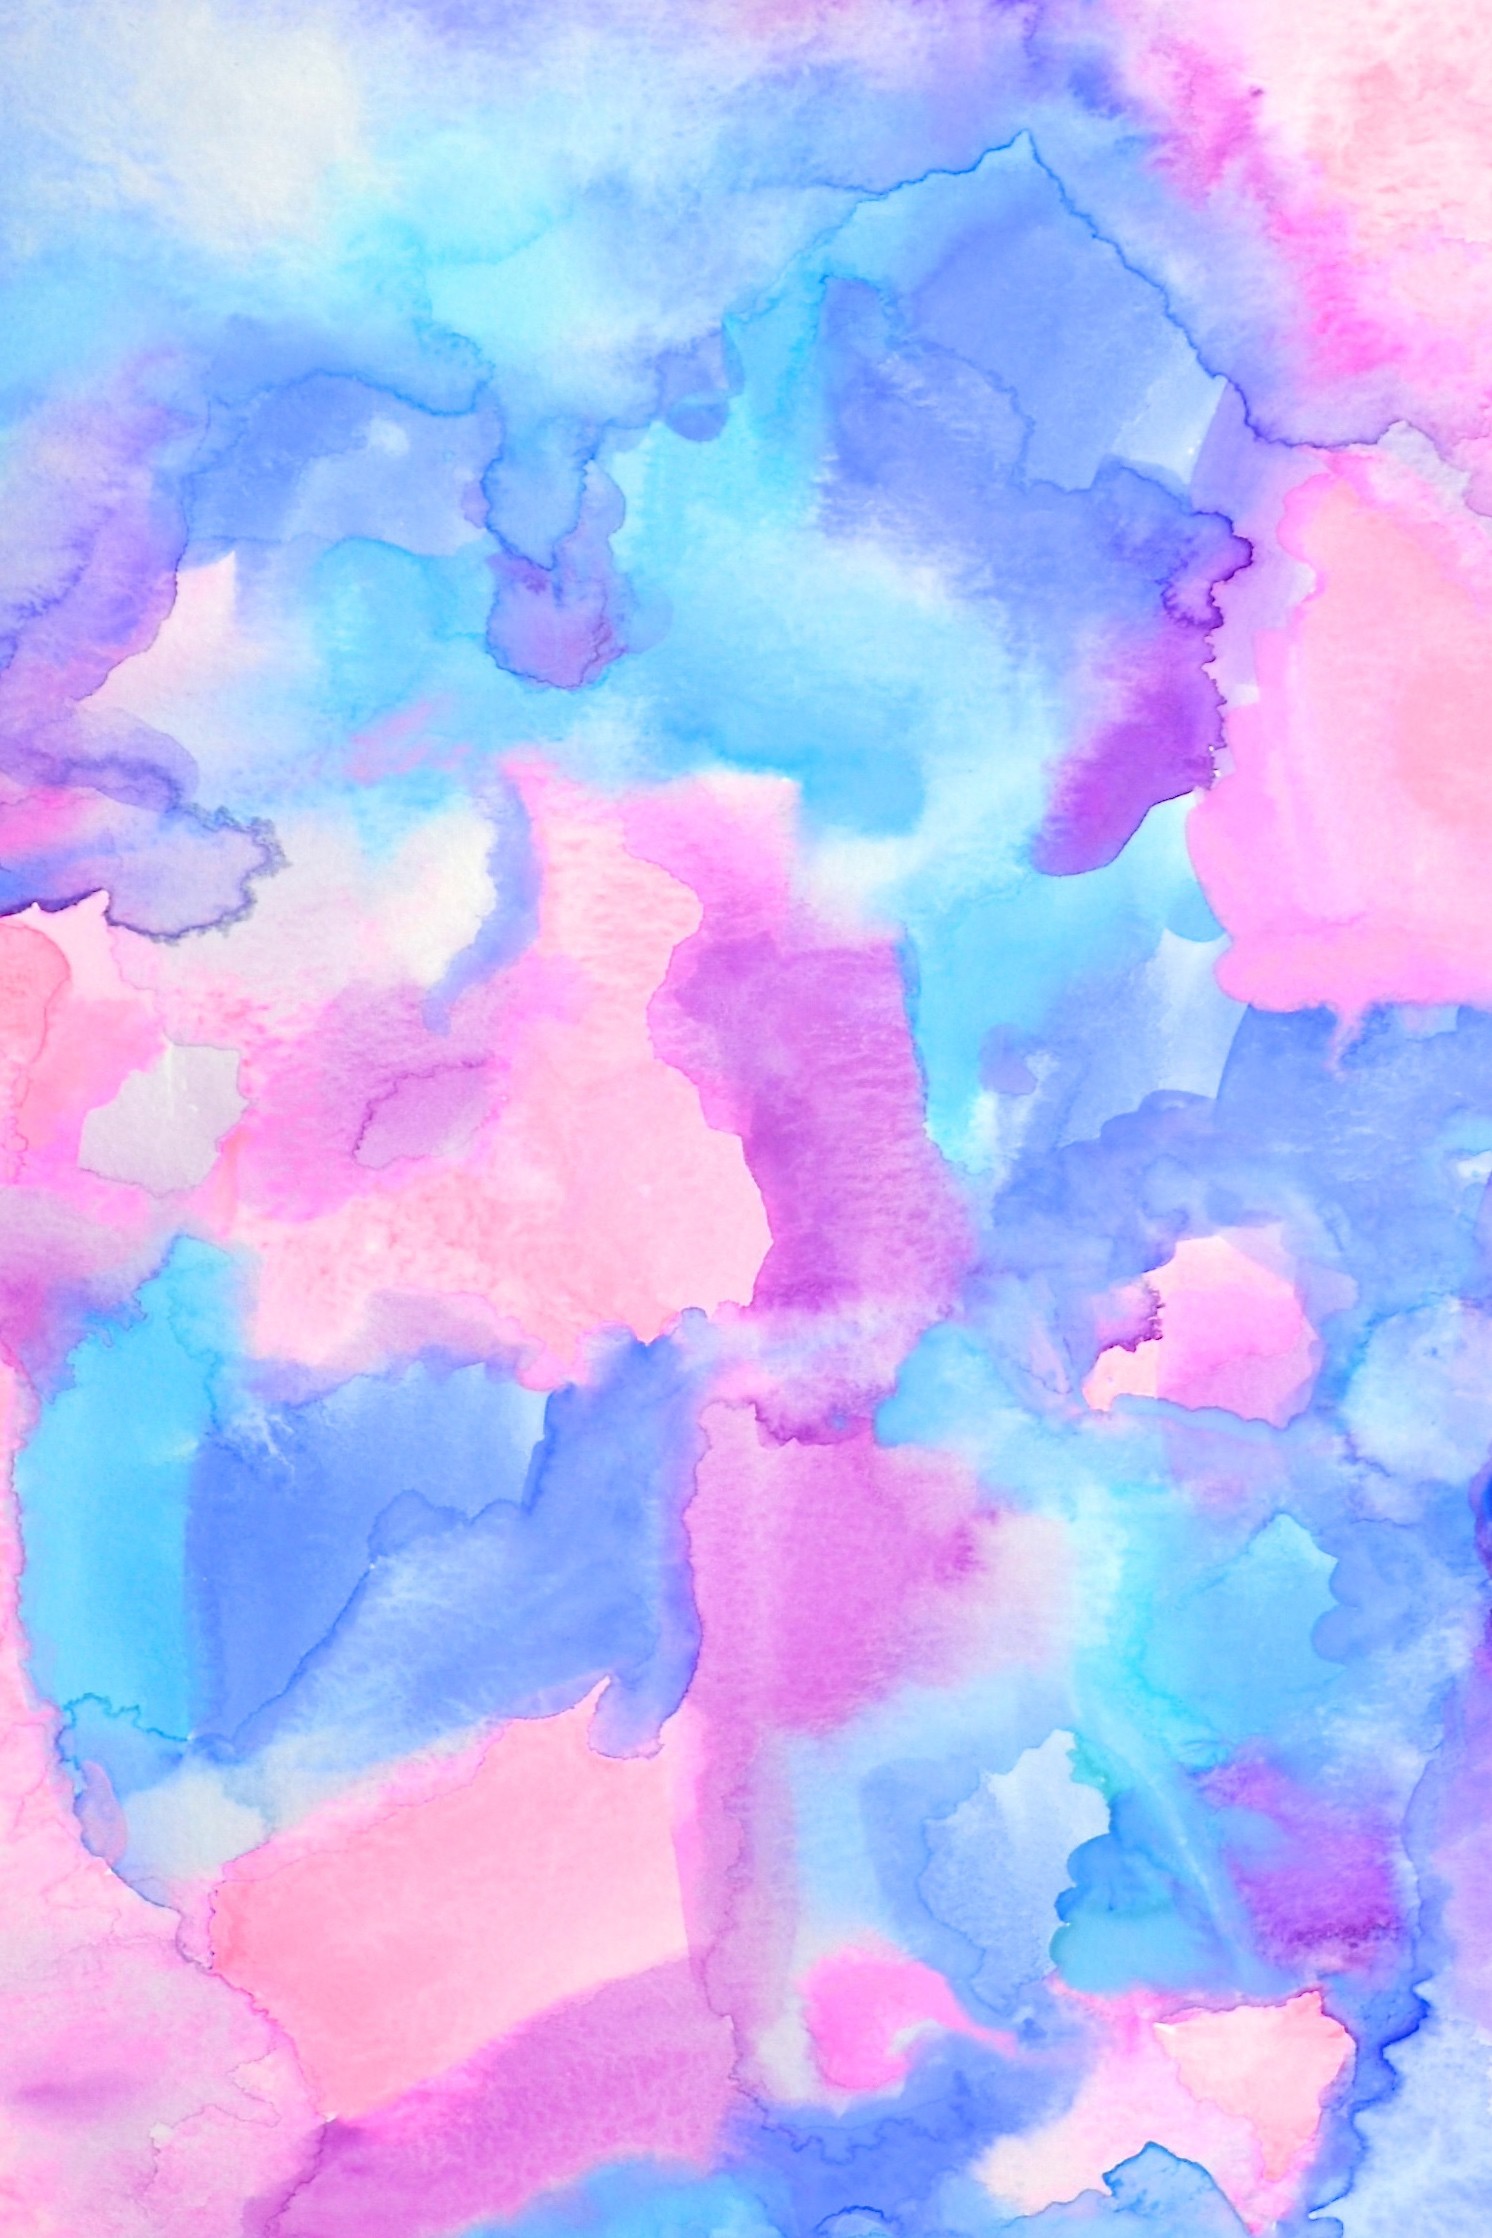 Ambrosia gorgeous free hand painted watercolor iPhone wallpaper